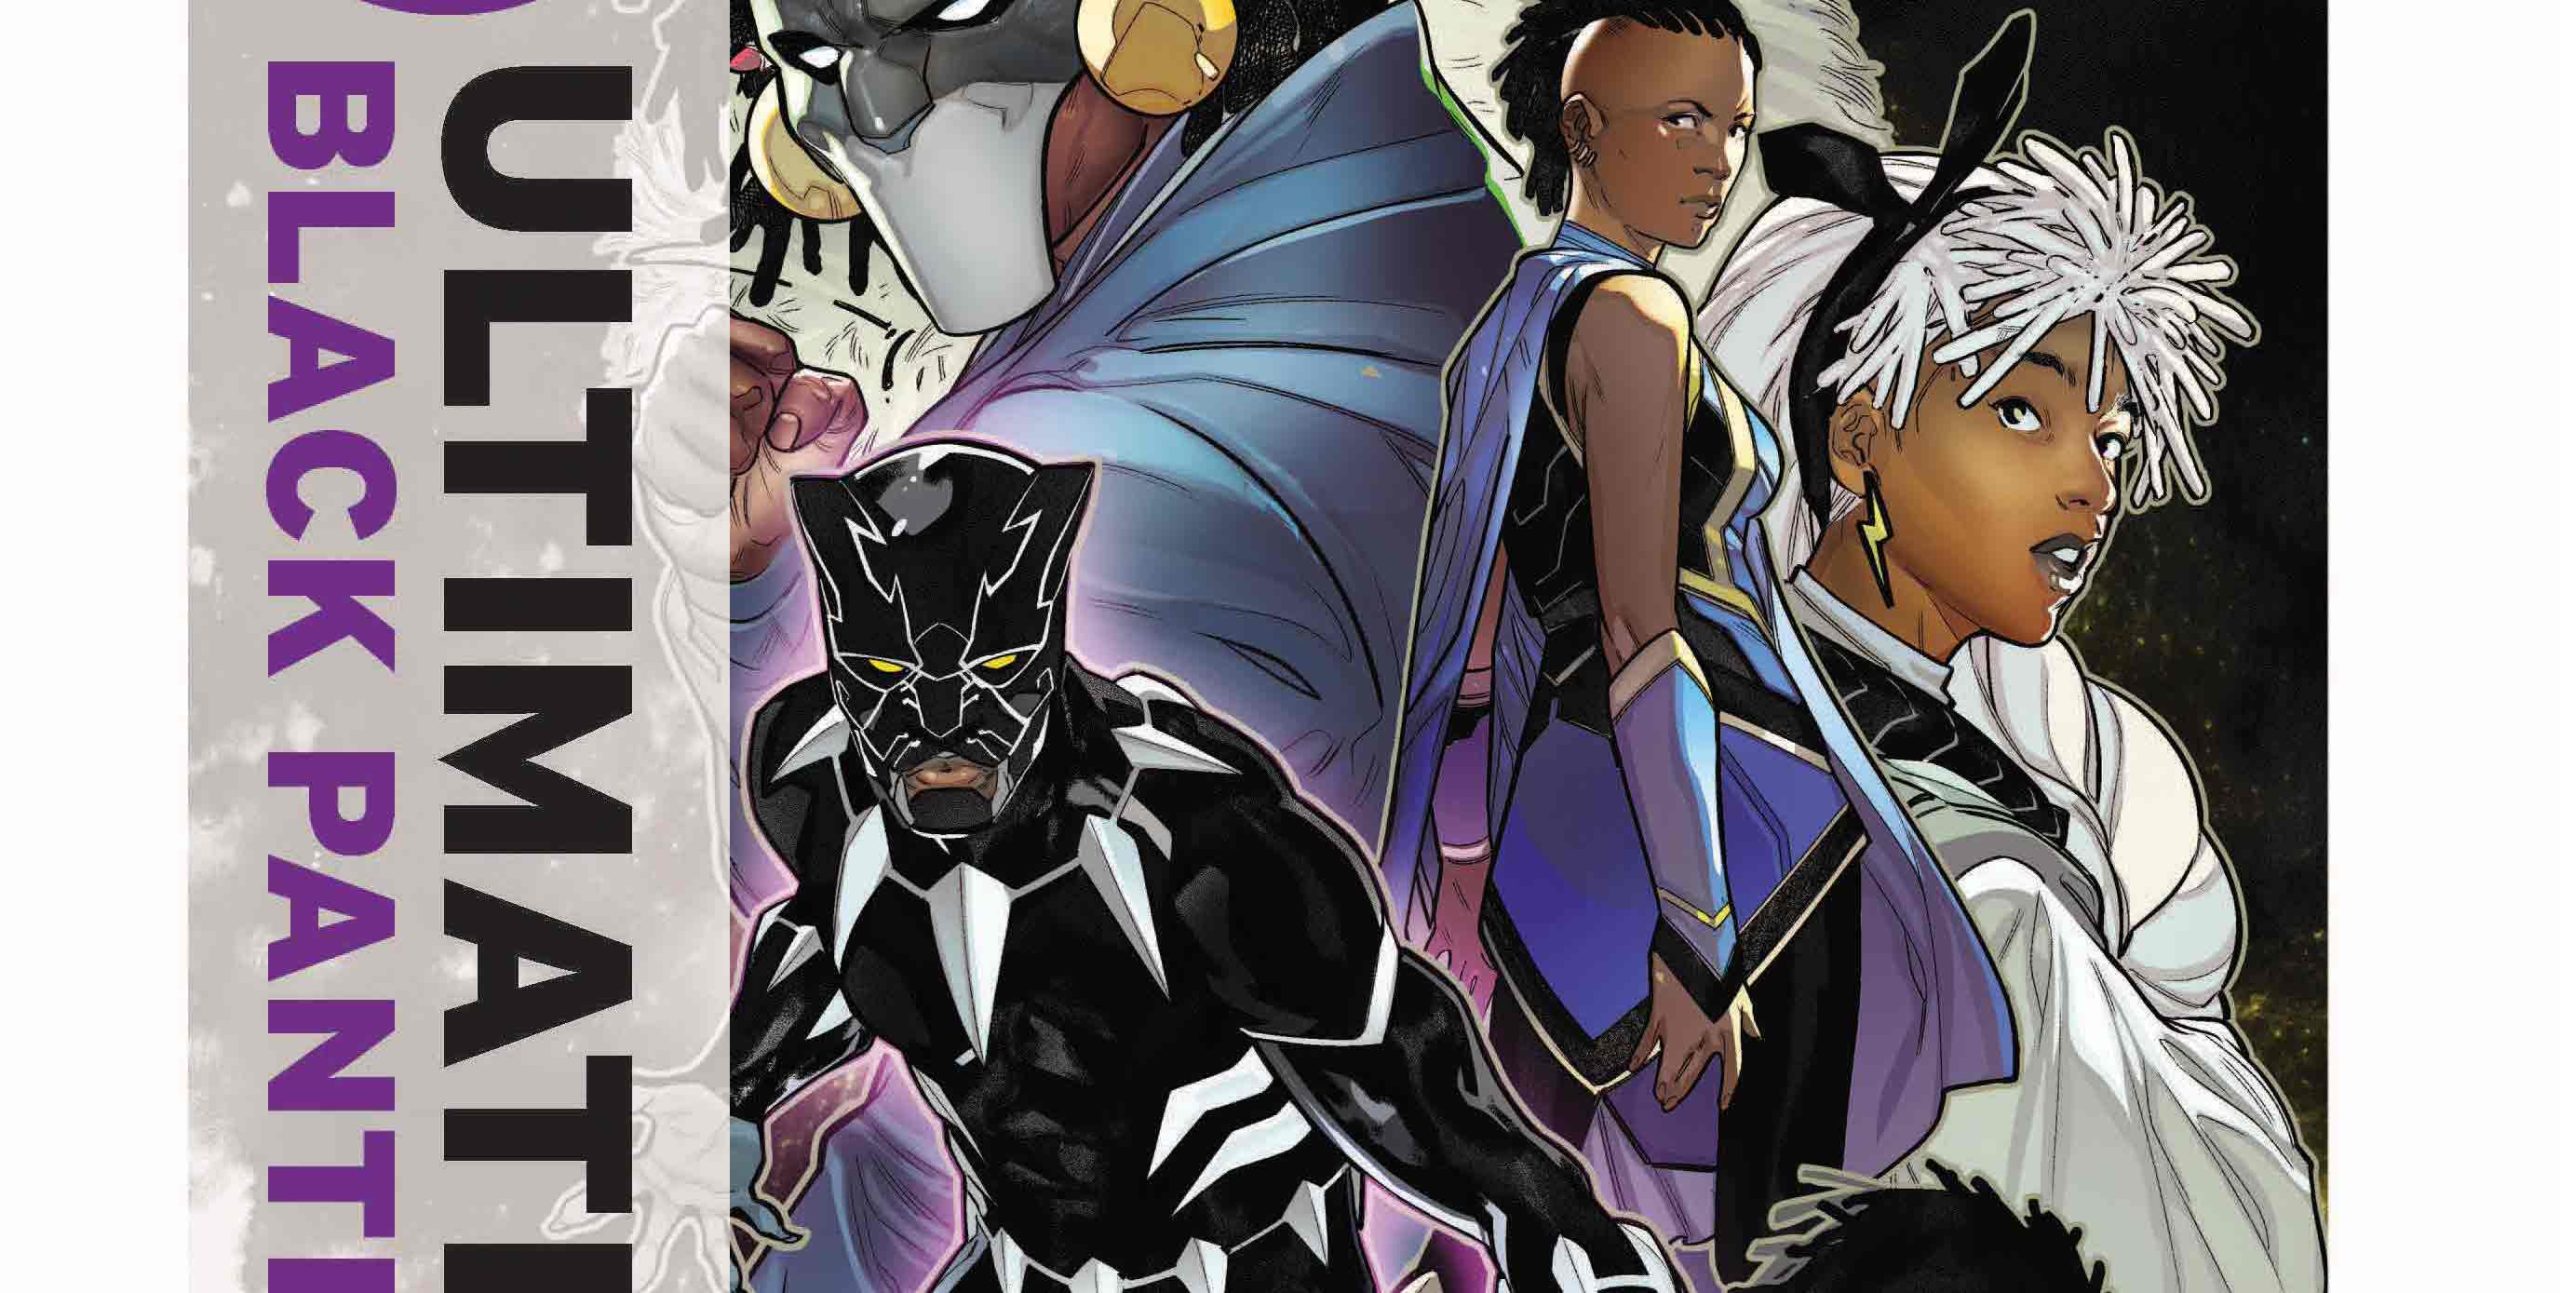 'Ultimate Black Panther' #1 sells out prior to release with second printing on the way